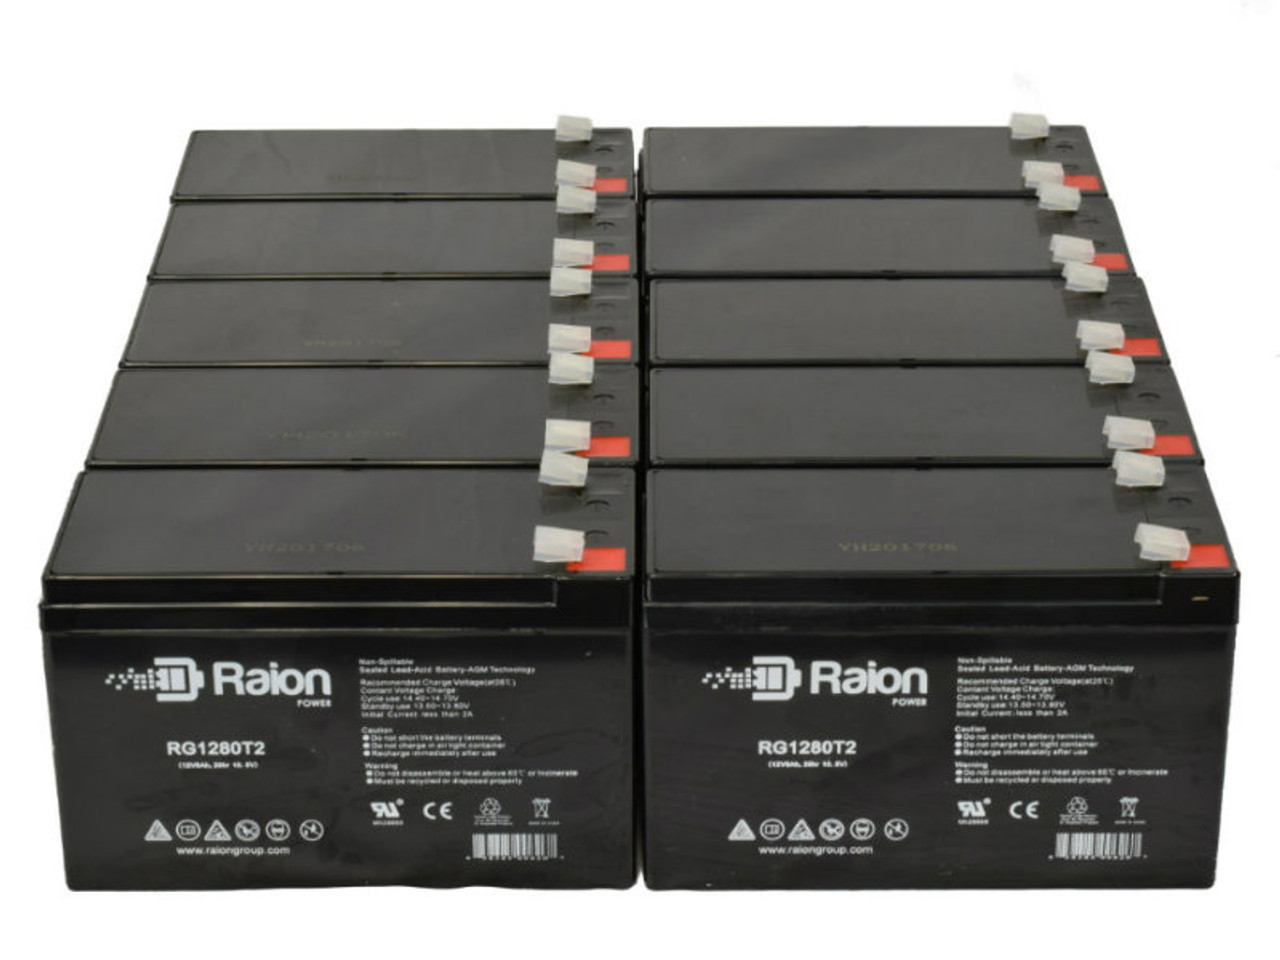 Raion Power Replacement 12V 8Ah RG1280T2 Battery for Gould Sp2009 Recorder - 10 Pack